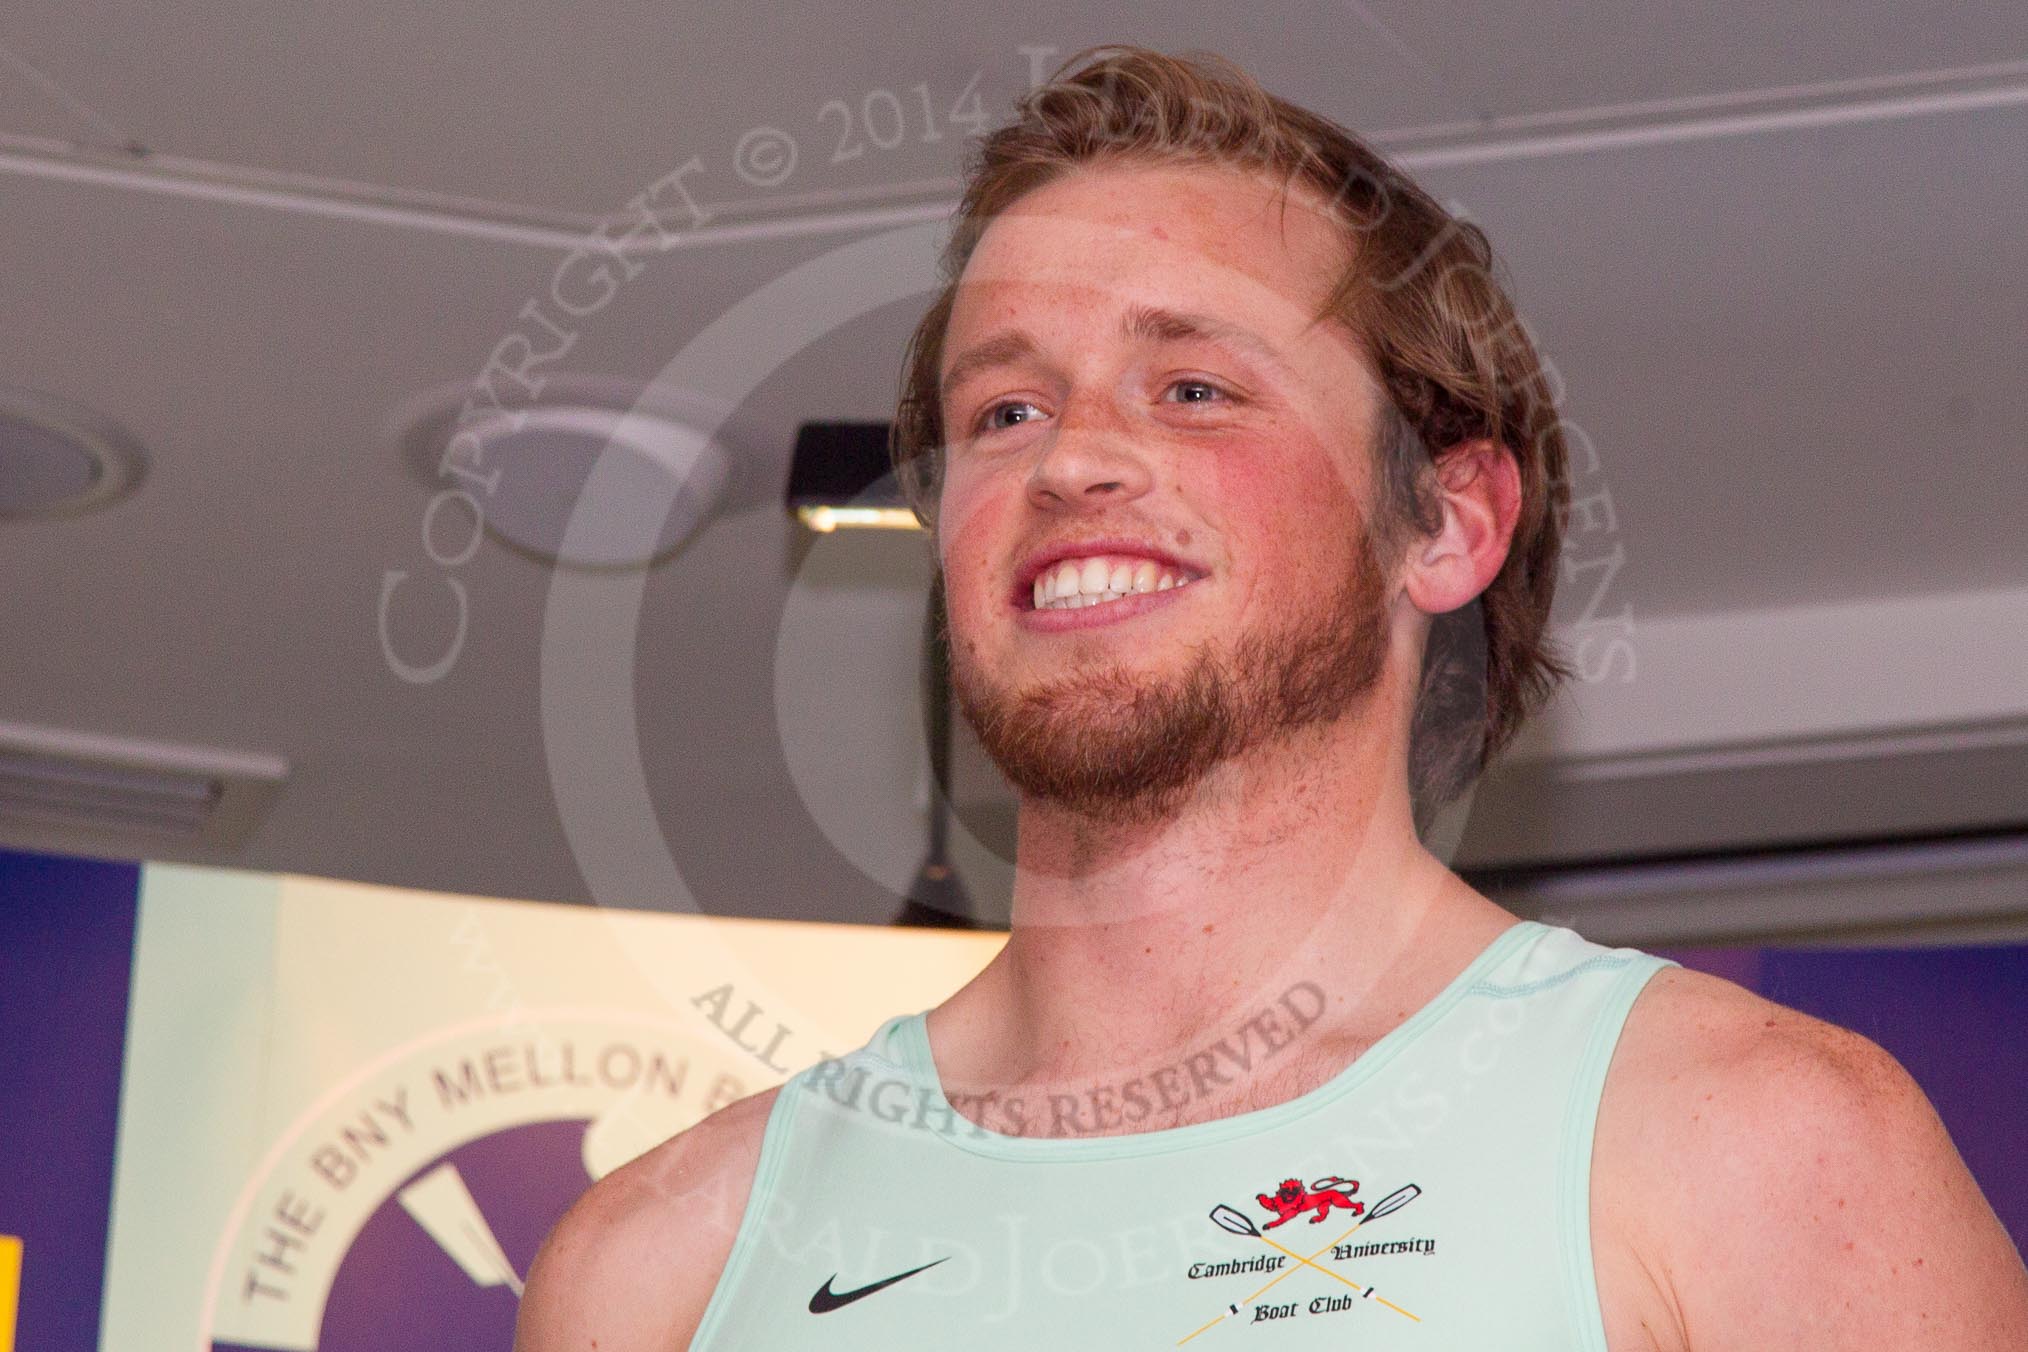 The Boat Race season 2014 - Crew Announcement and Weigh In: The 2014 Boat Race crews: Cambridge 2 seat Luke Juckett - 84.2kg..
BNY Mellon Centre,
London EC4V 4LA,
London,
United Kingdom,
on 10 March 2014 at 11:59, image #82